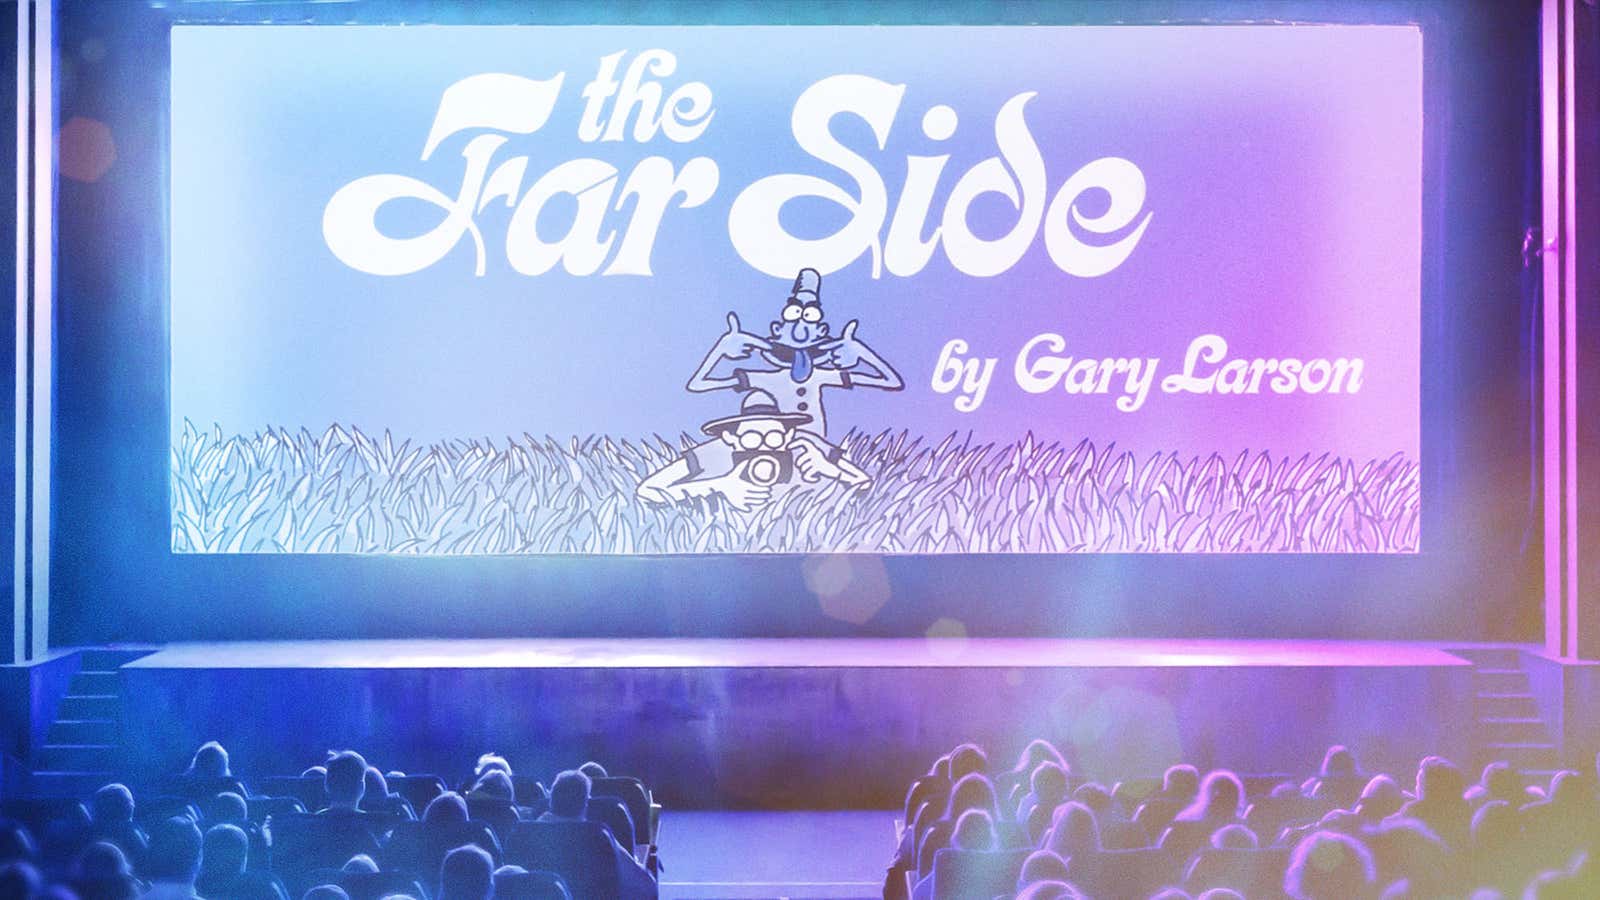 Theater image: igoriss/Getty Images; Book cover: The Far Side, Volume 1 by Gary Larson (Andrews McMeel Publishing, 1982 FarWorks, Inc.)